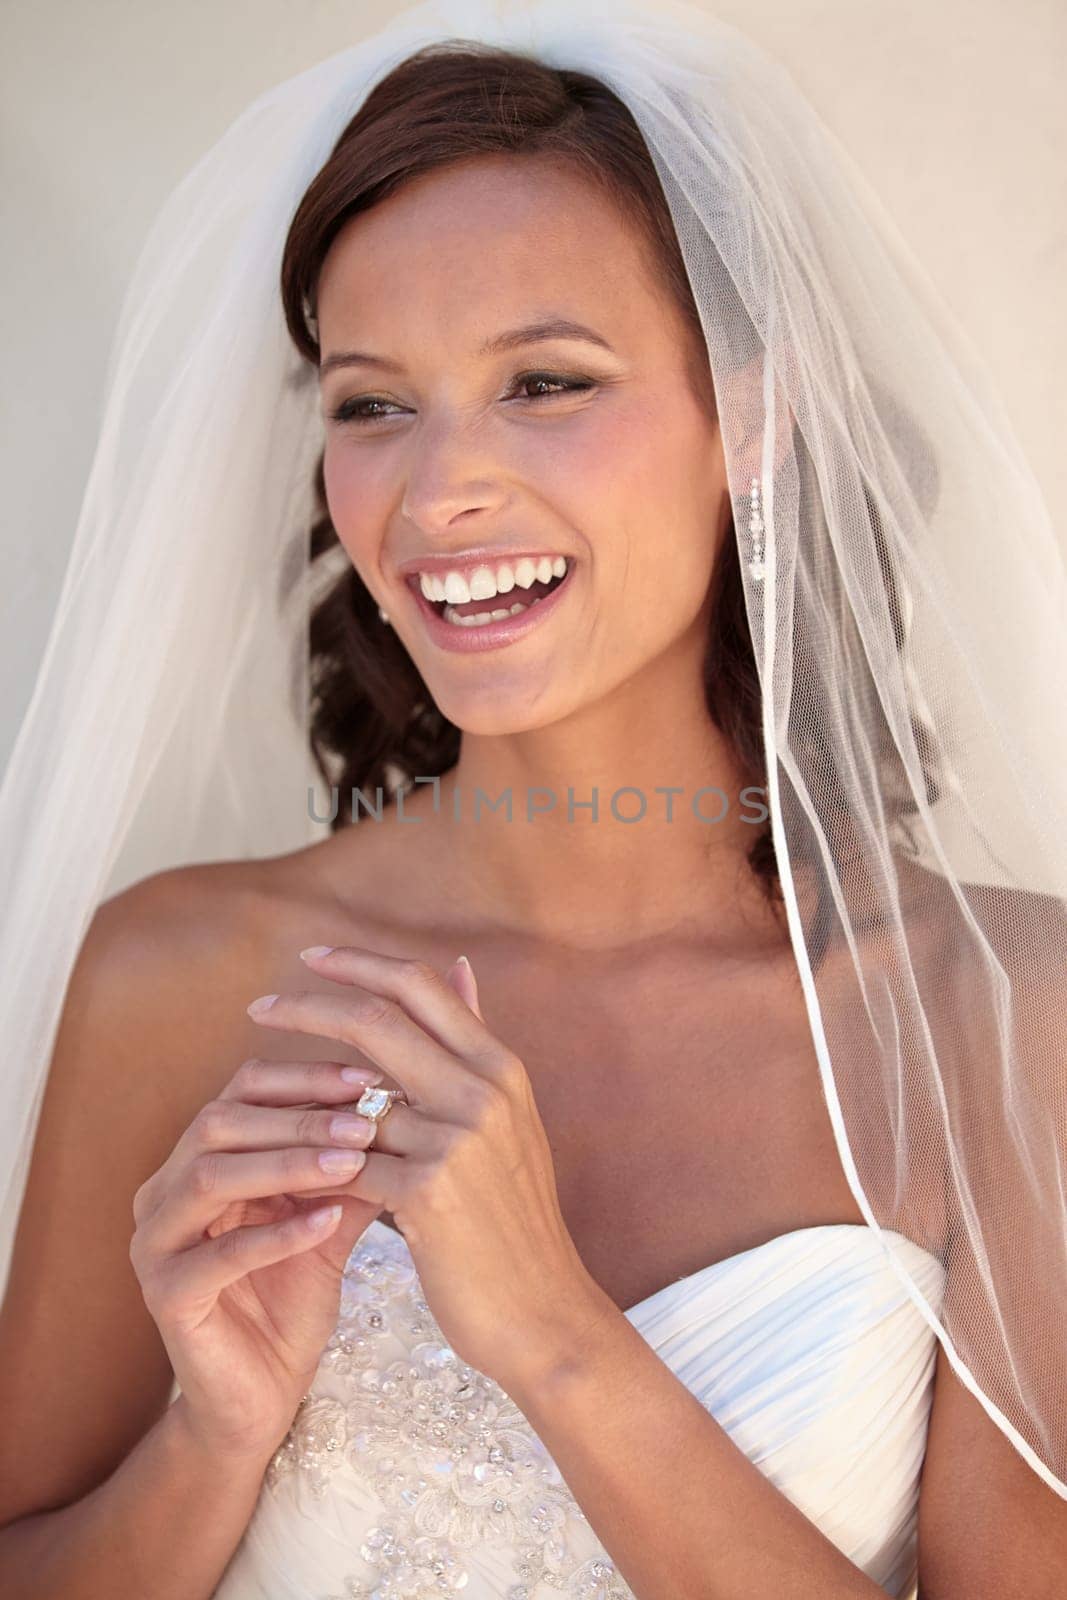 Woman, wedding dress and ring for marriage celebration event, romance party or promise commitment. Female person, bride and veil or accessory jewelry for love ceremony, partnership or union bonding.